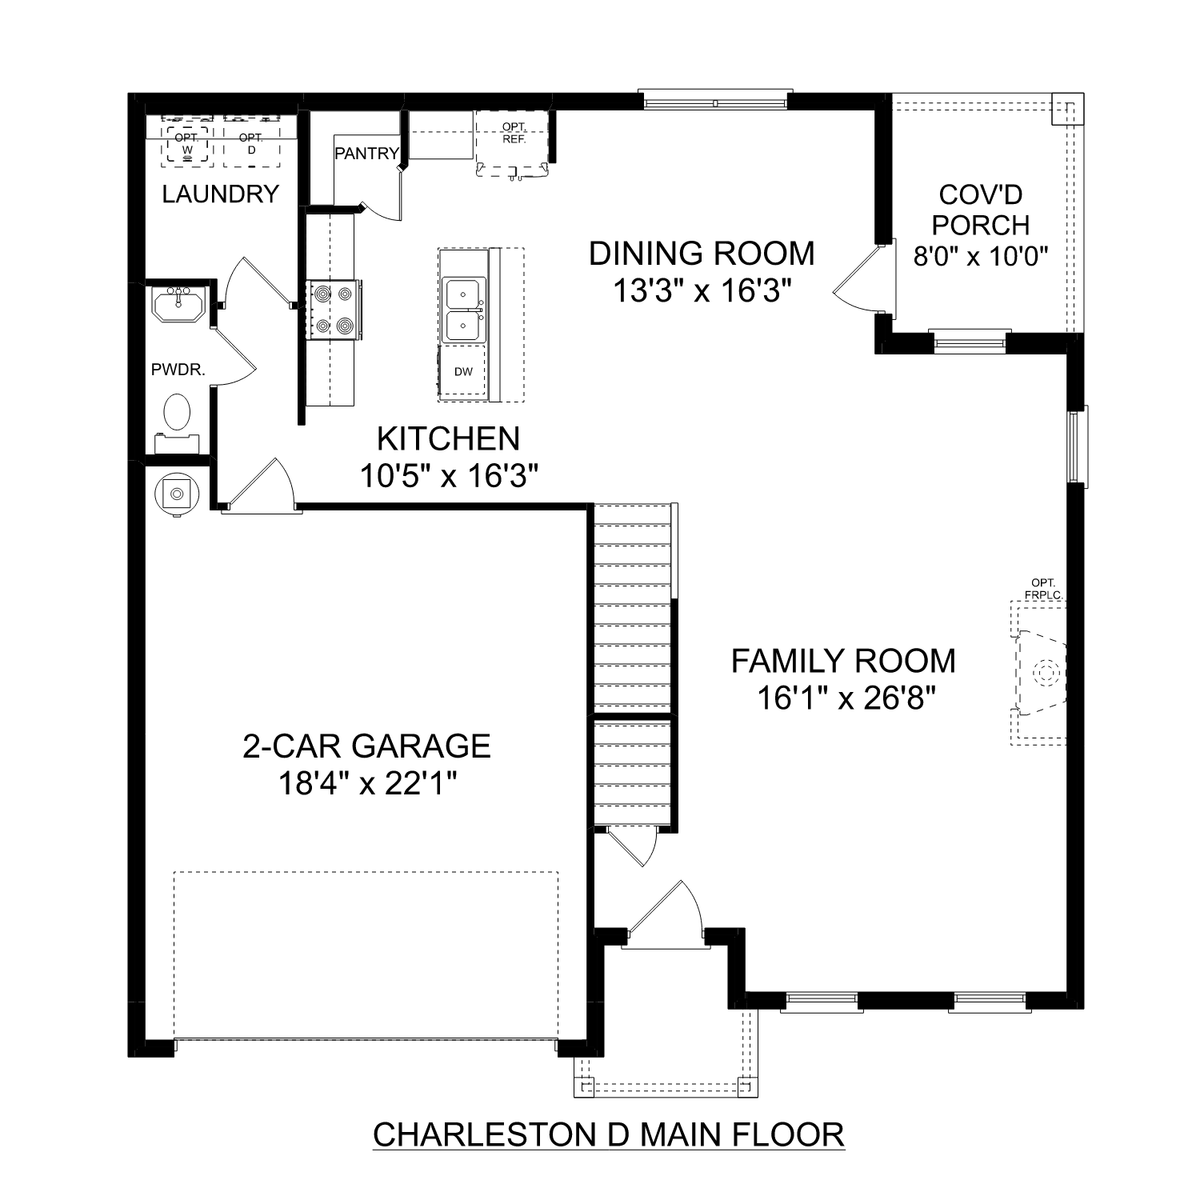 1 - The Charleston D buildable floor plan layout in Davidson Homes' Creekside community.